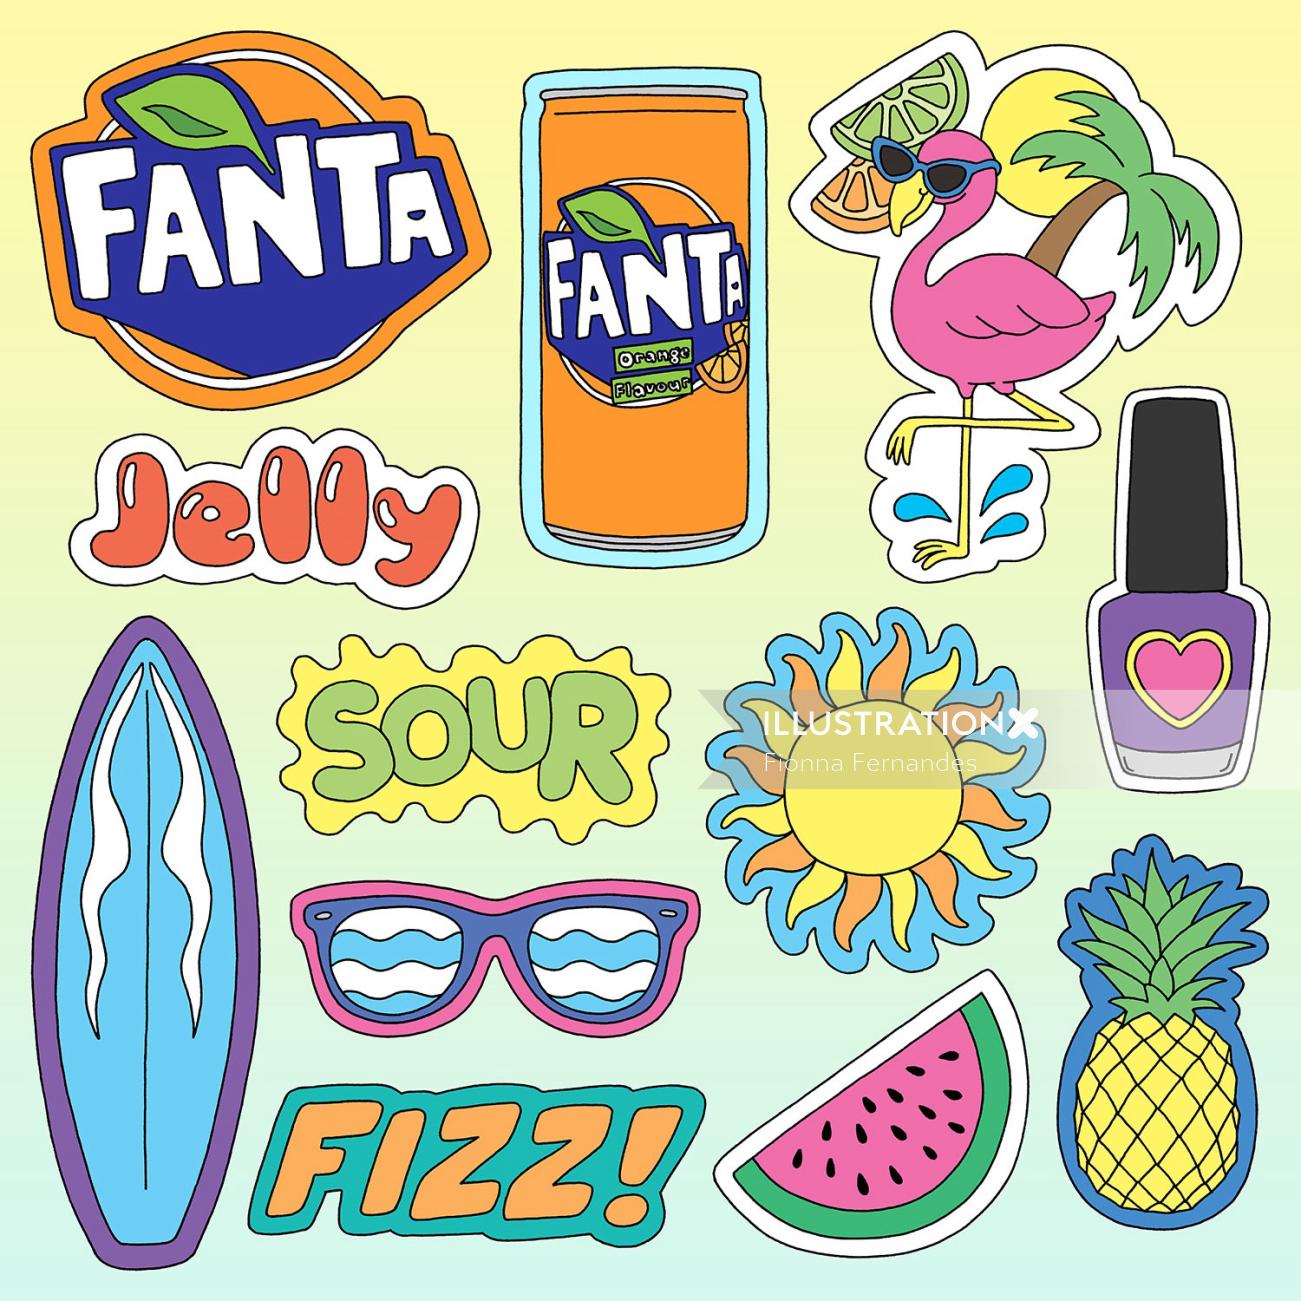 Fanta Stickers Made By Fionna Fernandes